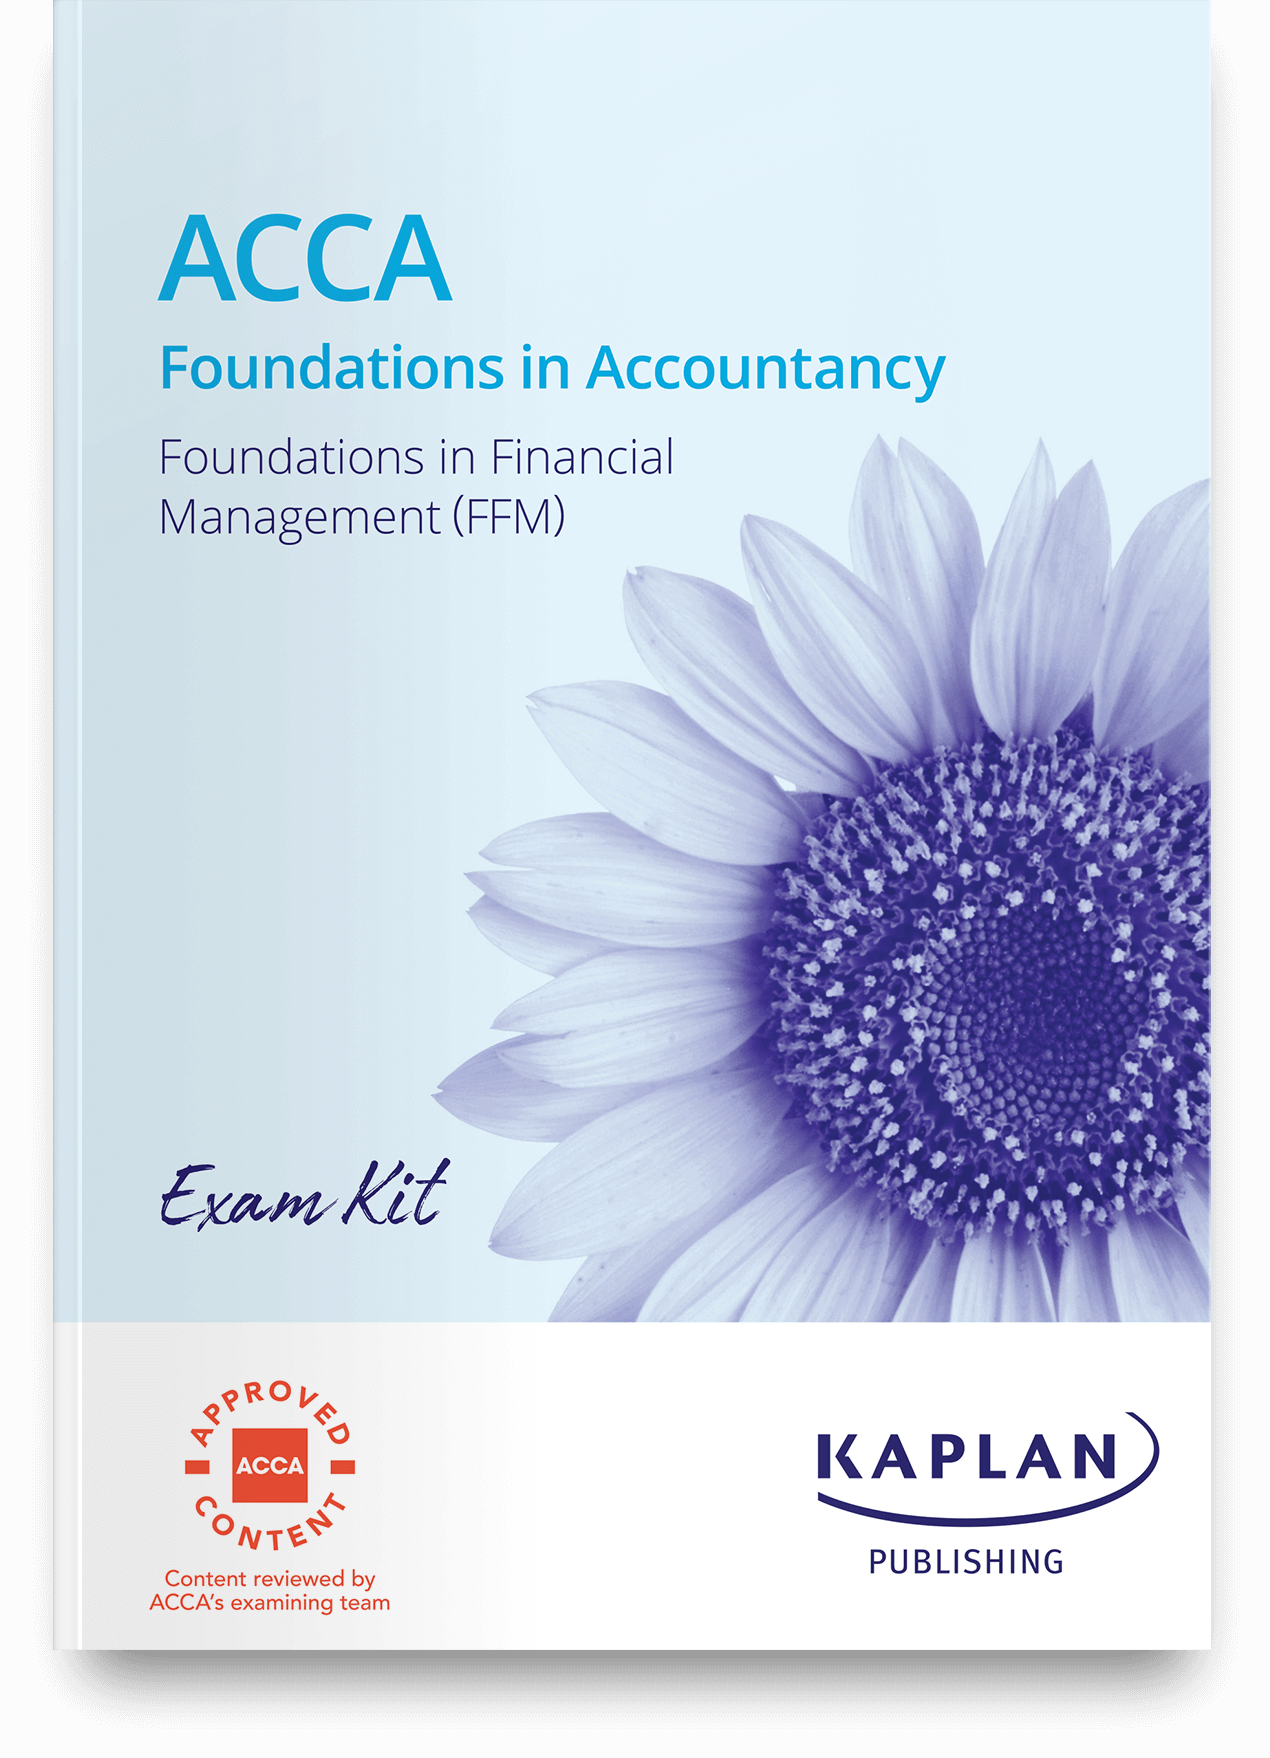 An image of the book for ACCA Foundations - Foundations in Financial Management (FFM) - Exam Kit